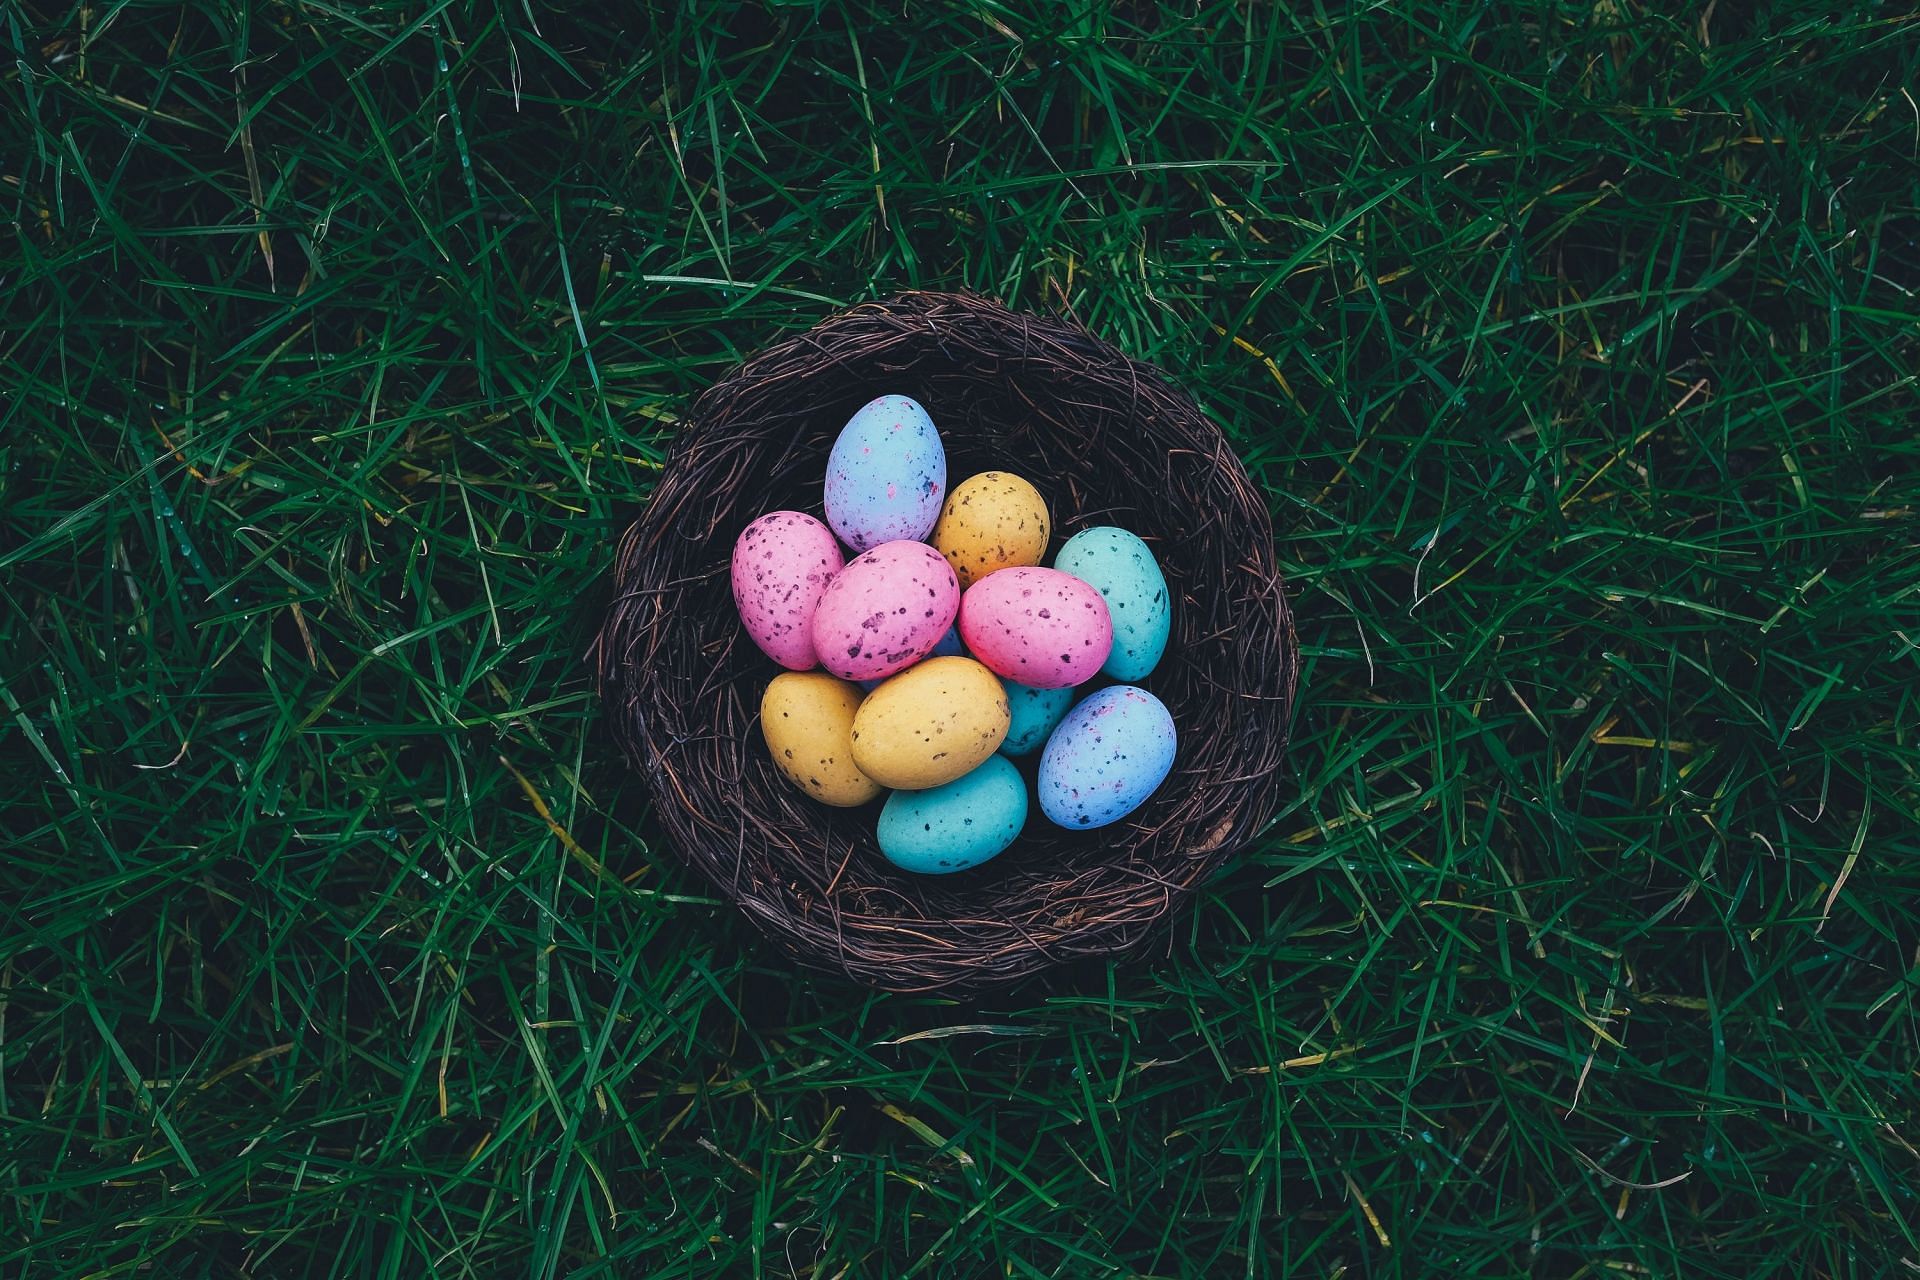 Coloring the easter eggs has been an age-old tradition. (Image via unsplash / annie spratt)